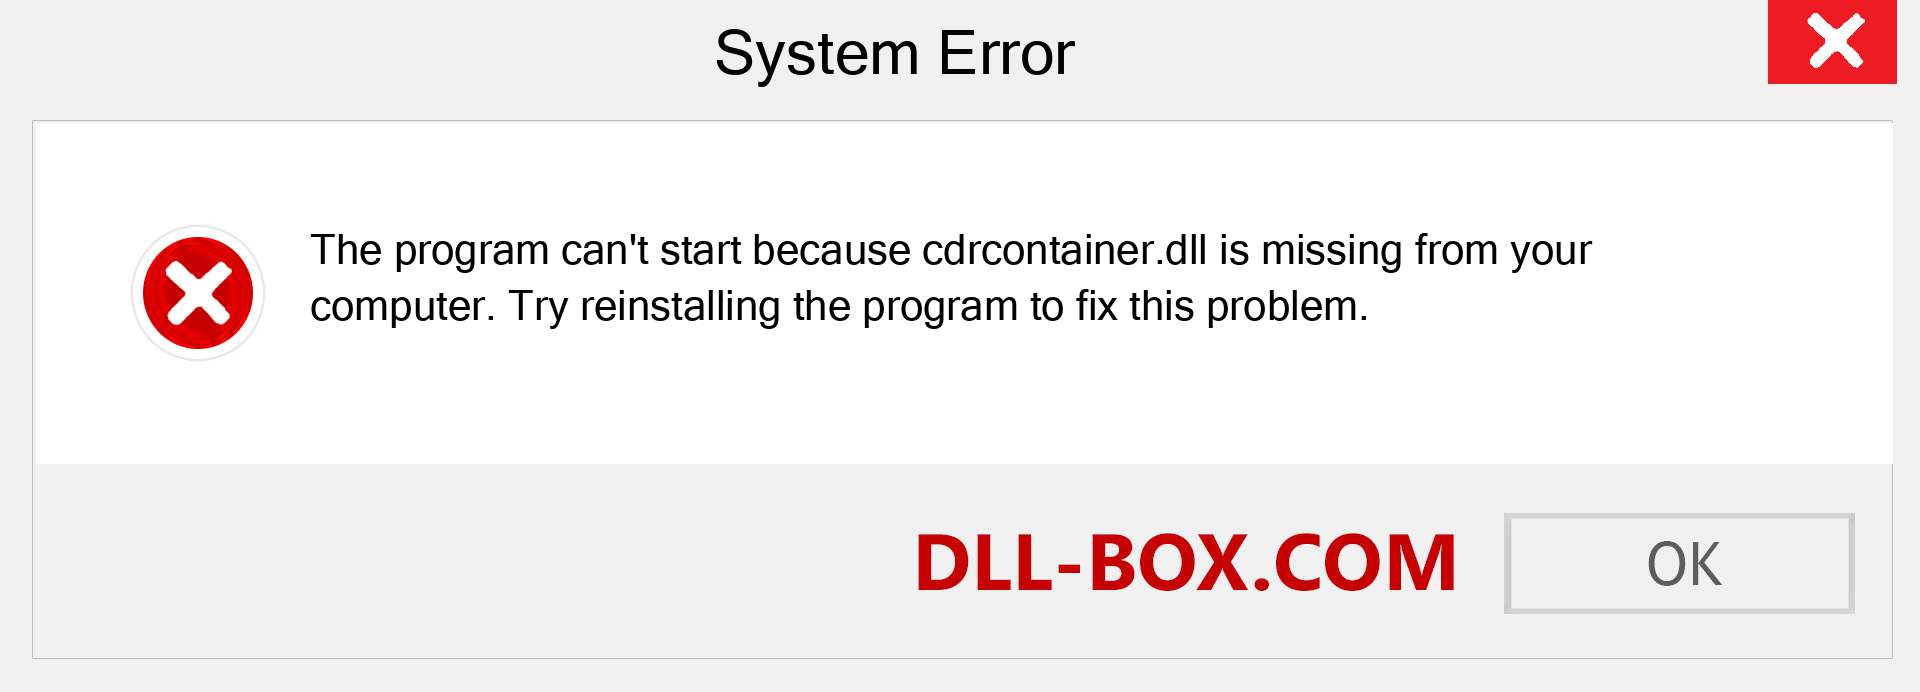  cdrcontainer.dll file is missing?. Download for Windows 7, 8, 10 - Fix  cdrcontainer dll Missing Error on Windows, photos, images